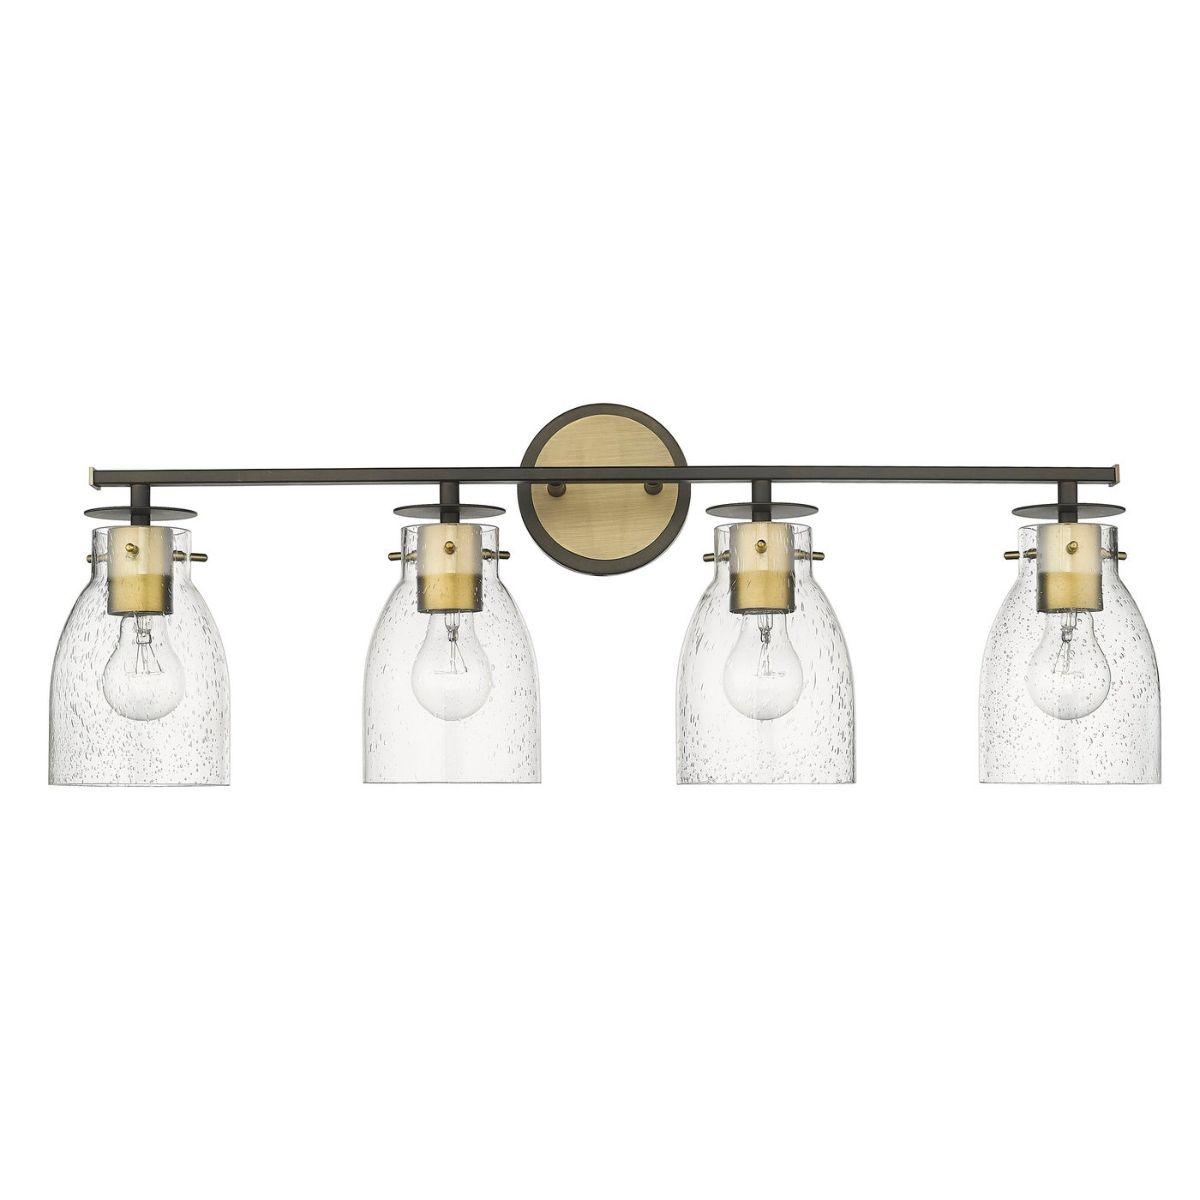 Shelby 31 in. 4 Lights Vanity Light Oil Rubbed Bronze & Antique Brass Finish